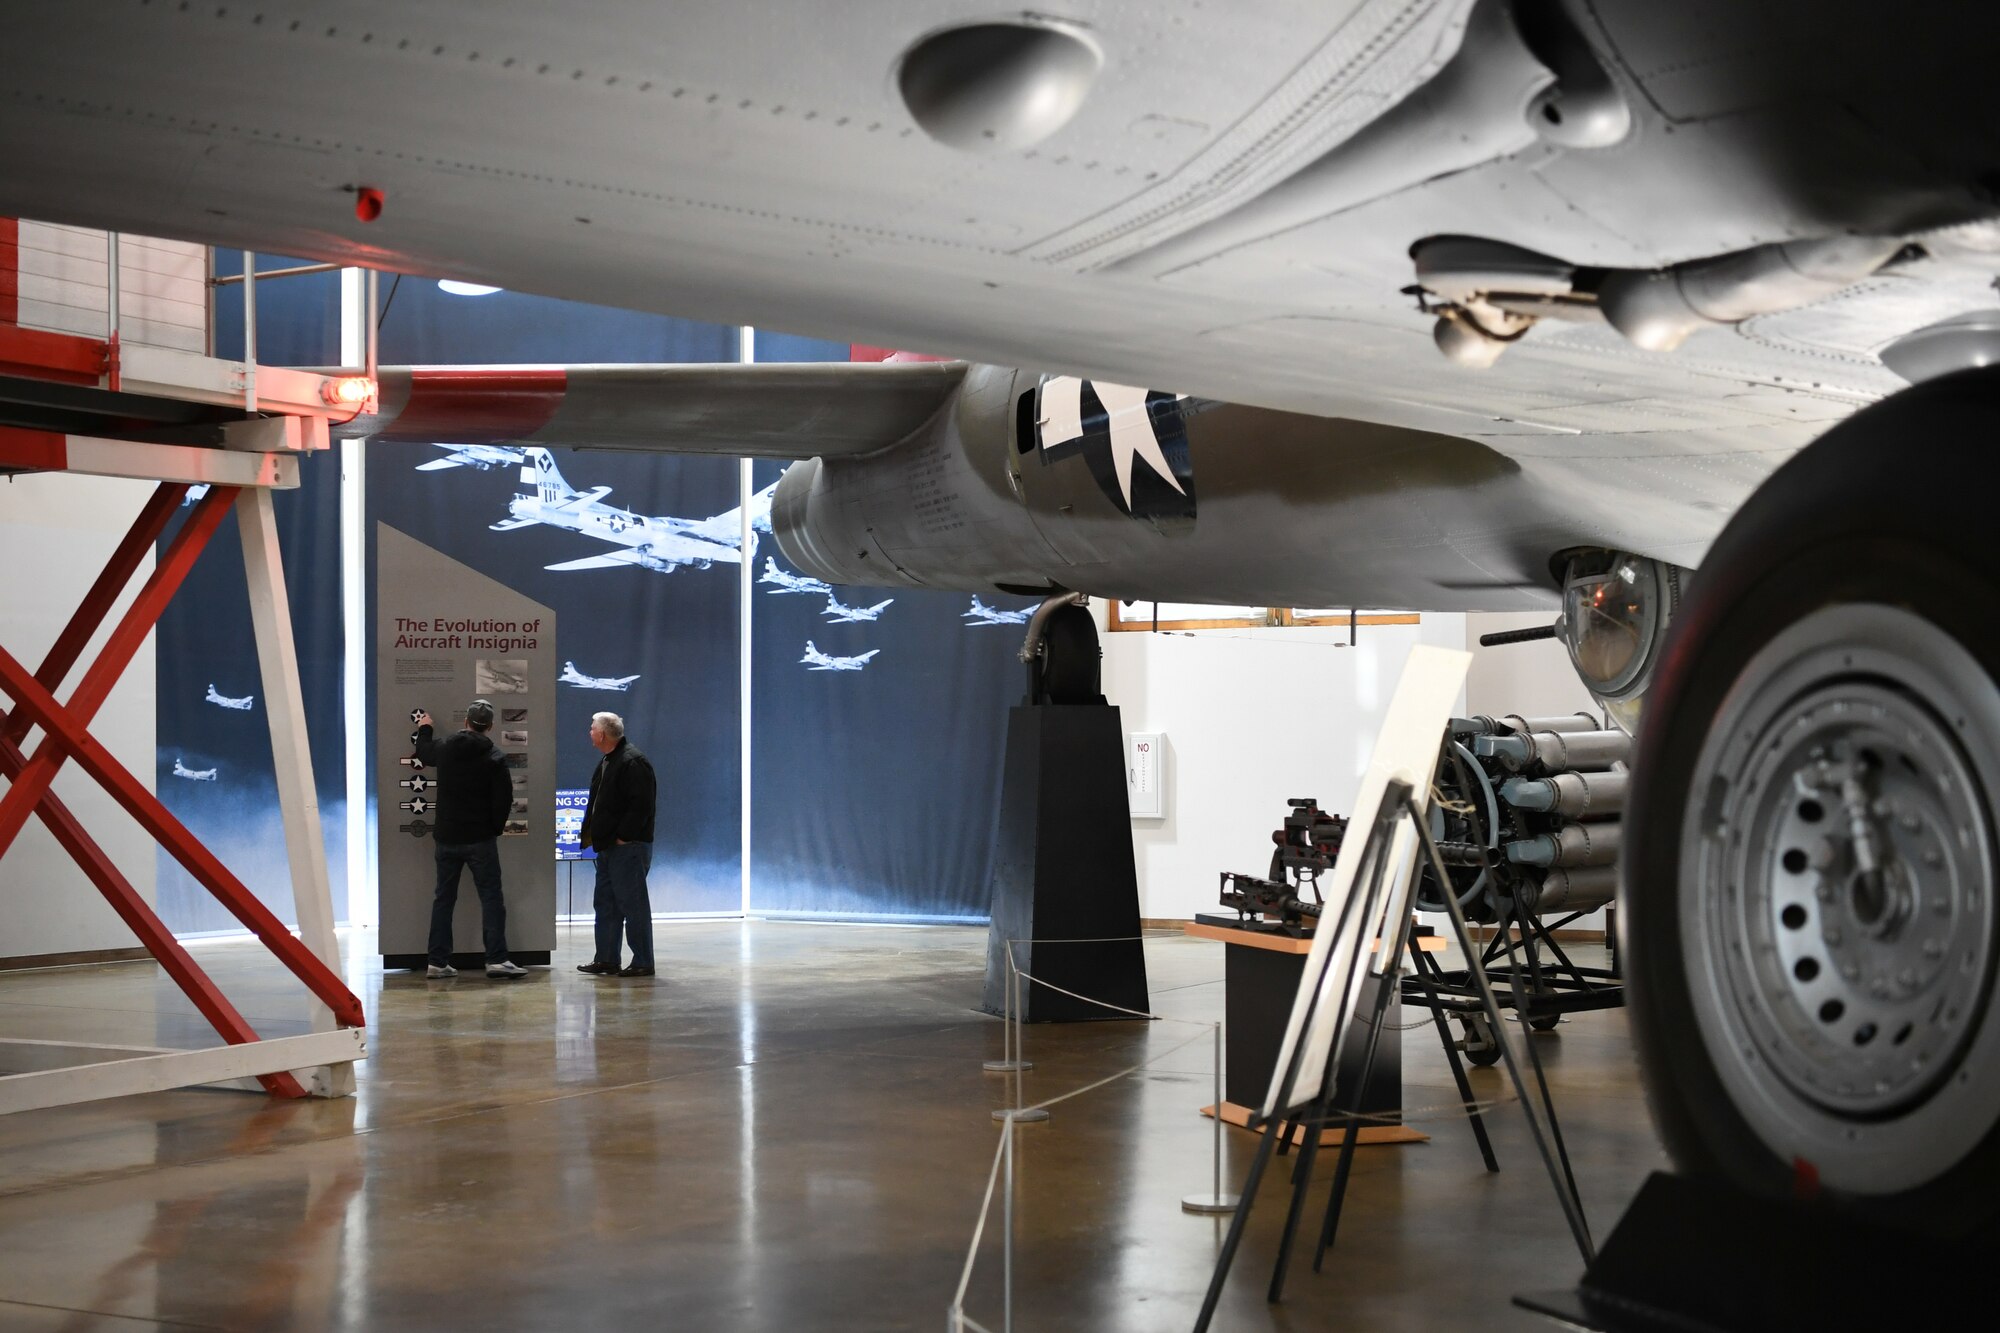 Visitors look at the Hill Aerospace Museum’s exhibits Dec. 20, 2019, at Hill Air Force Base, Utah. The museum recently celebrated its 5 millionth visitor in November 2019. (U.S. Air Force photo by Cynthia Griggs)